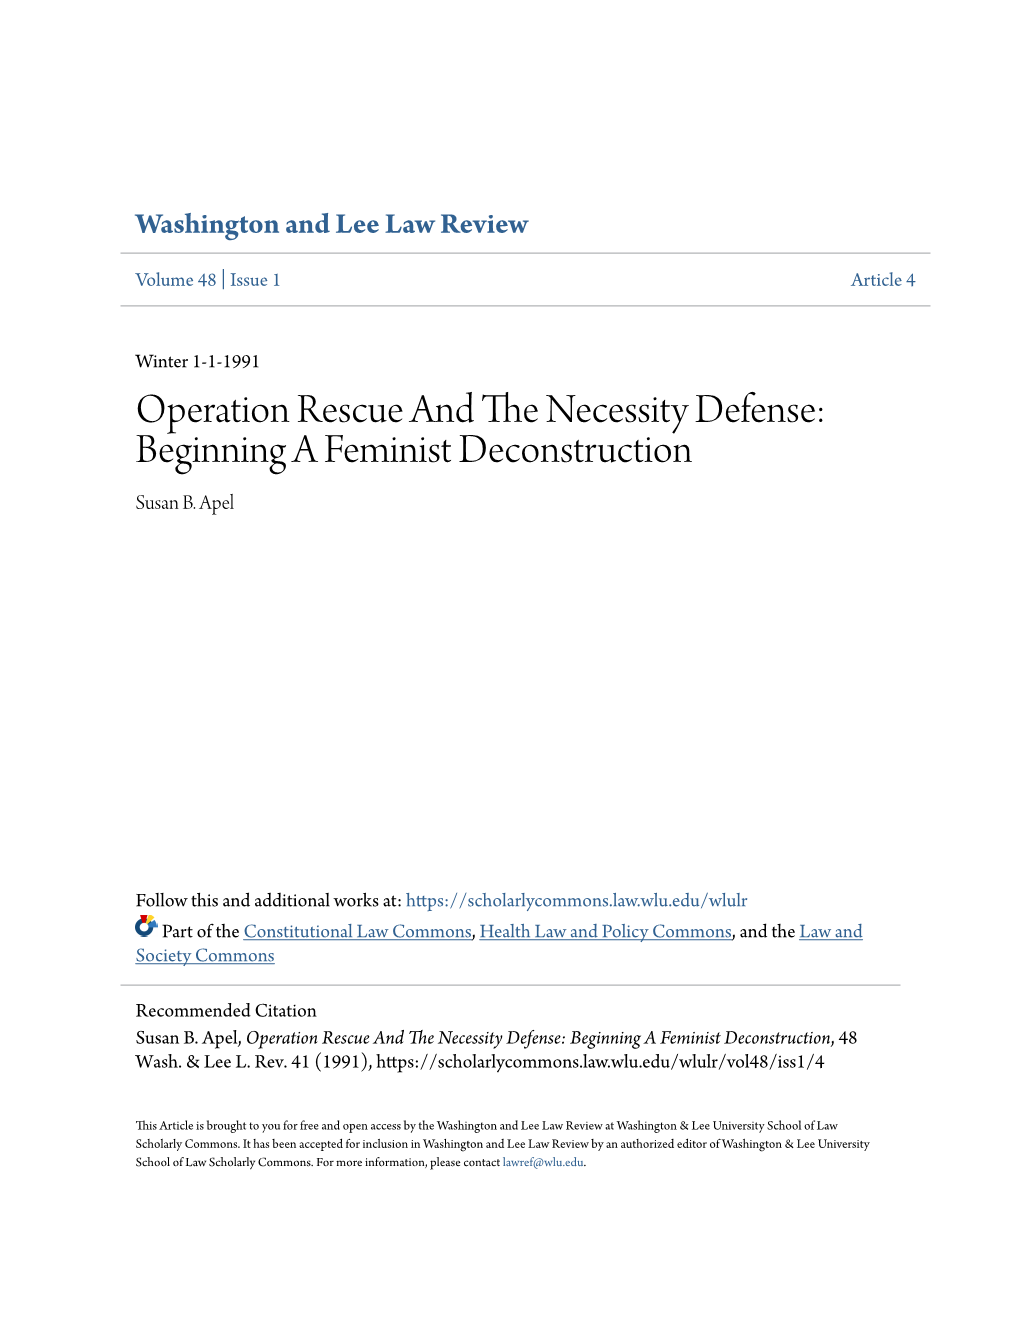 Operation Rescue and the Necessity Defense: Beginning a Feminist Deconstruction, 48 Wash